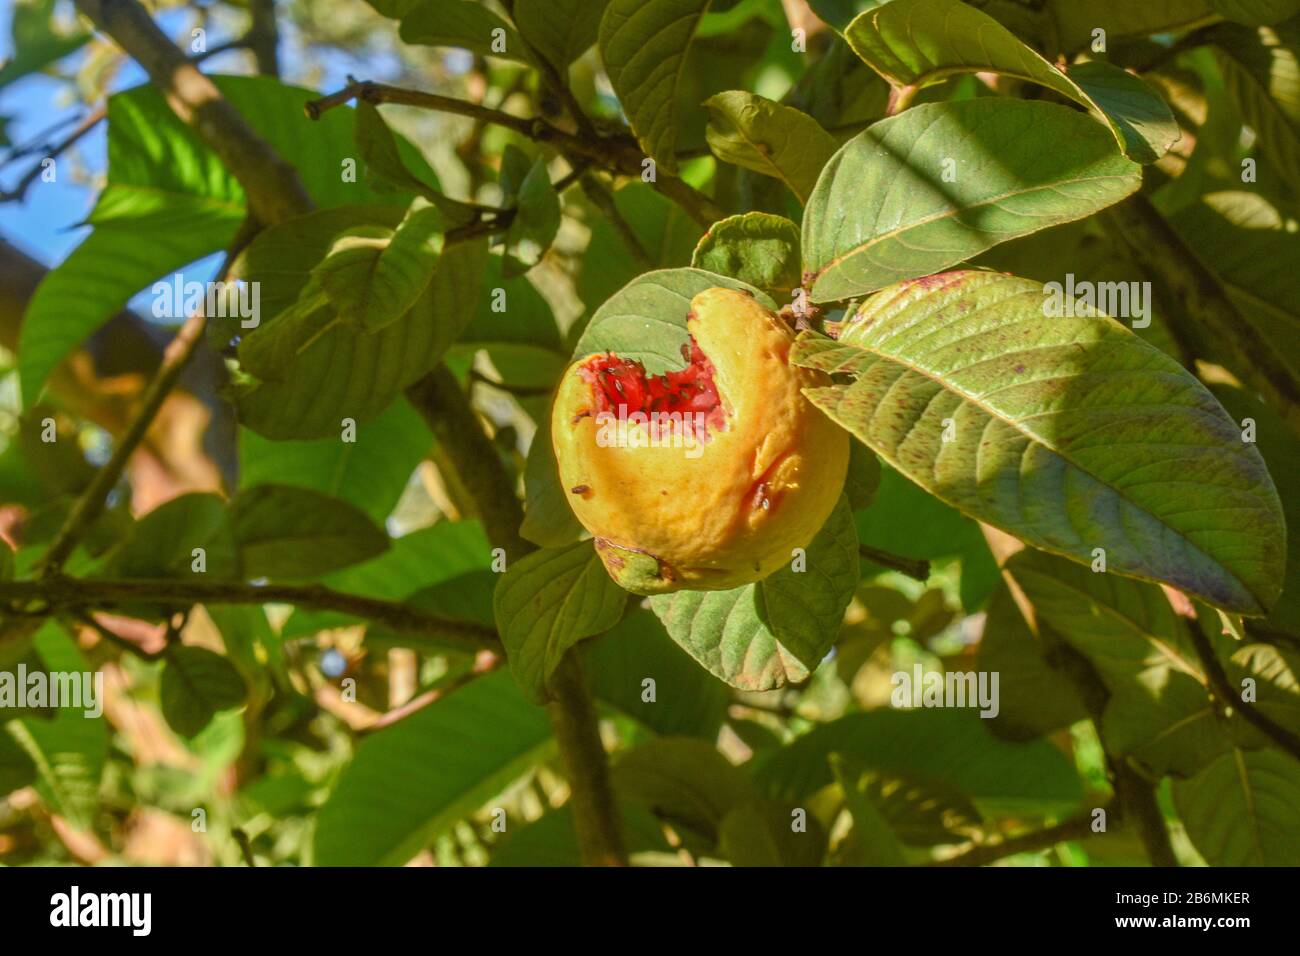 A ripe guava fruit on the tree eaten by birds. Stock Photo